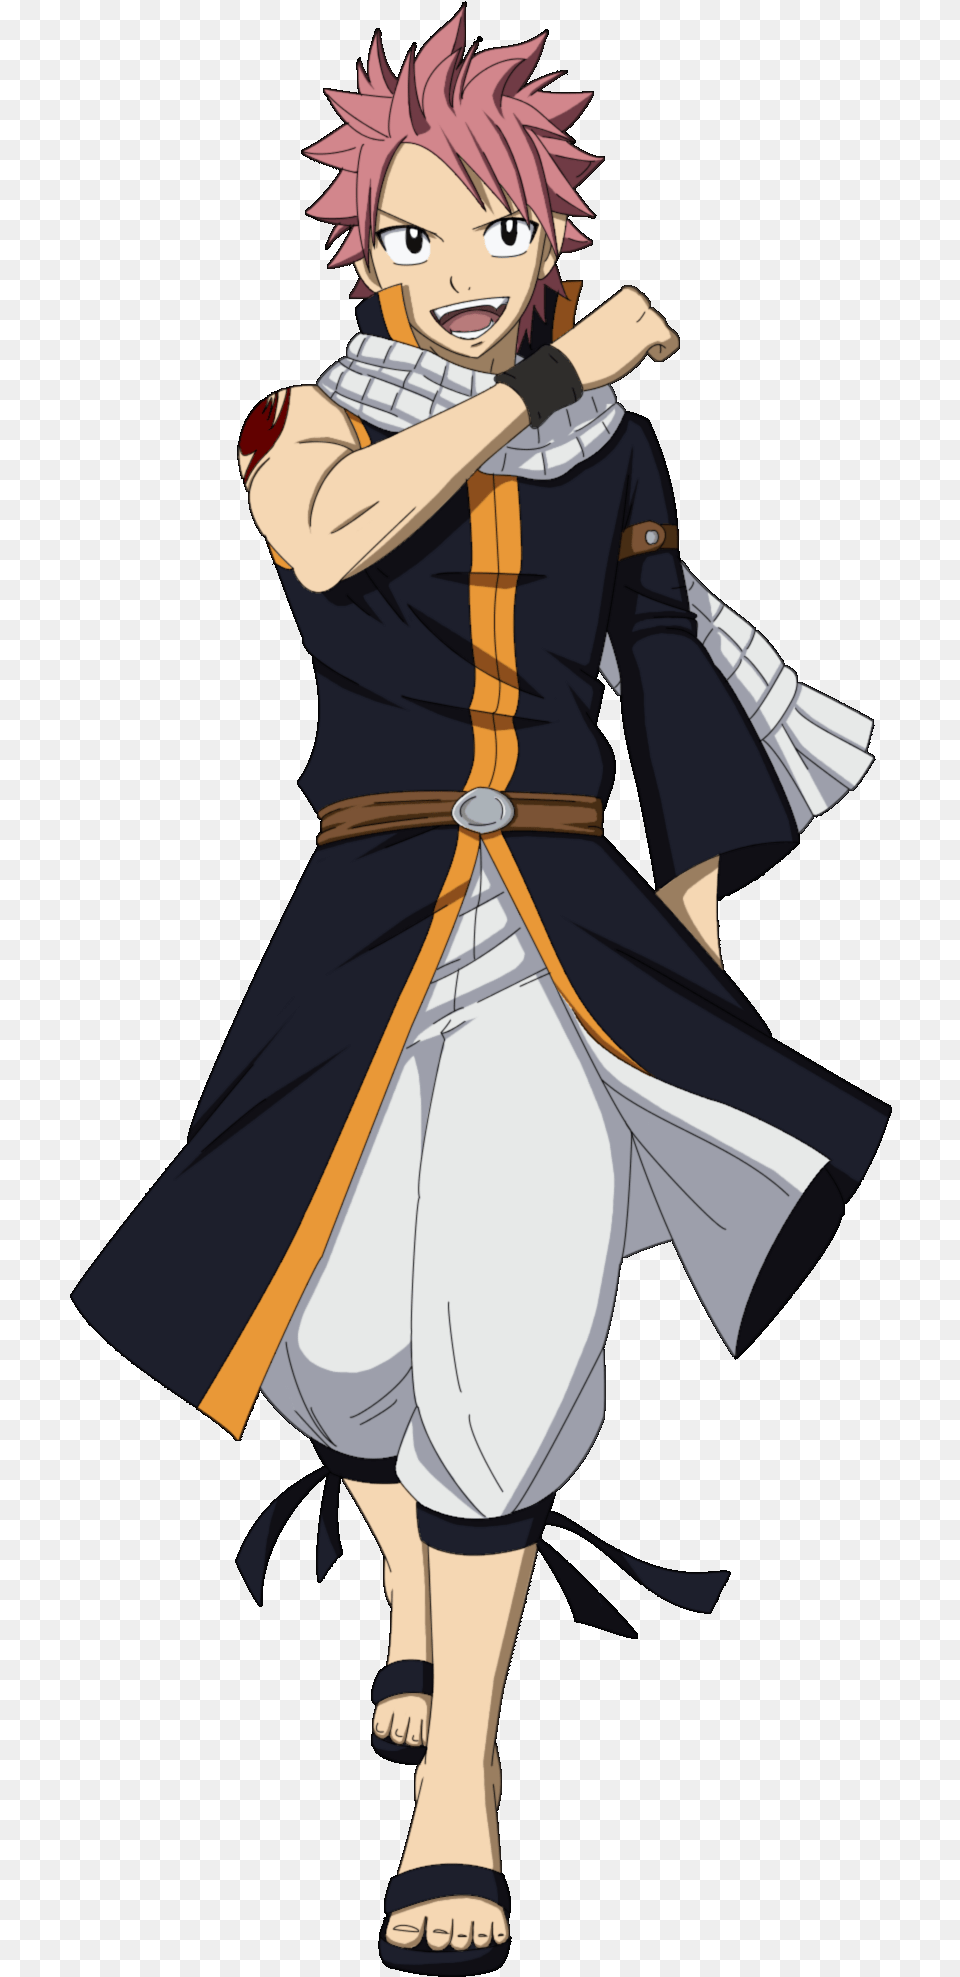 Natsu Dragneel Render By Annaeditions24 D6kkyky Natsu Dragneel No Background, Publication, Book, Comics, Manga Free Transparent Png